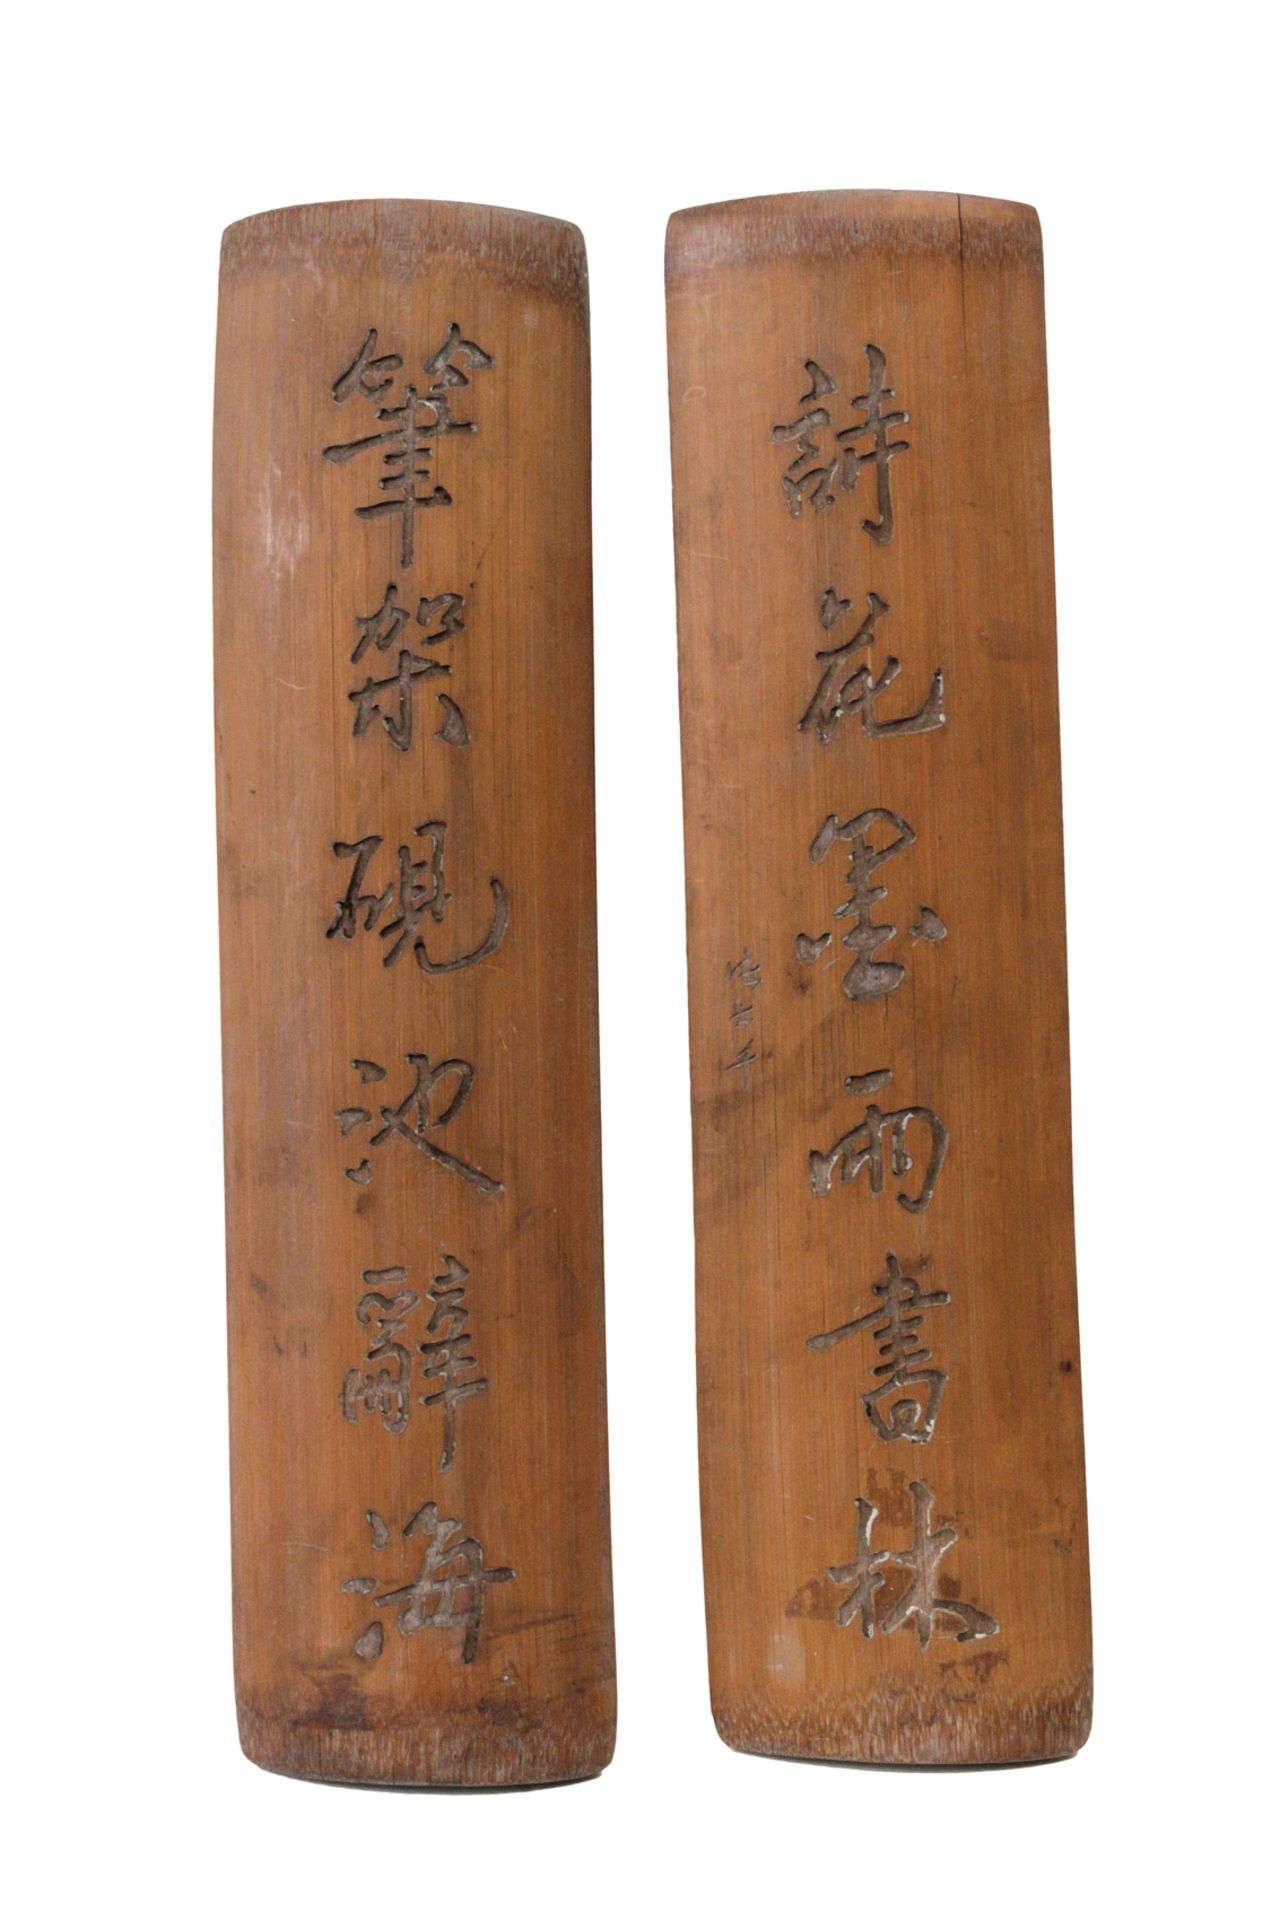 A pair of 20th century Chinese carved bamboo wrist rests